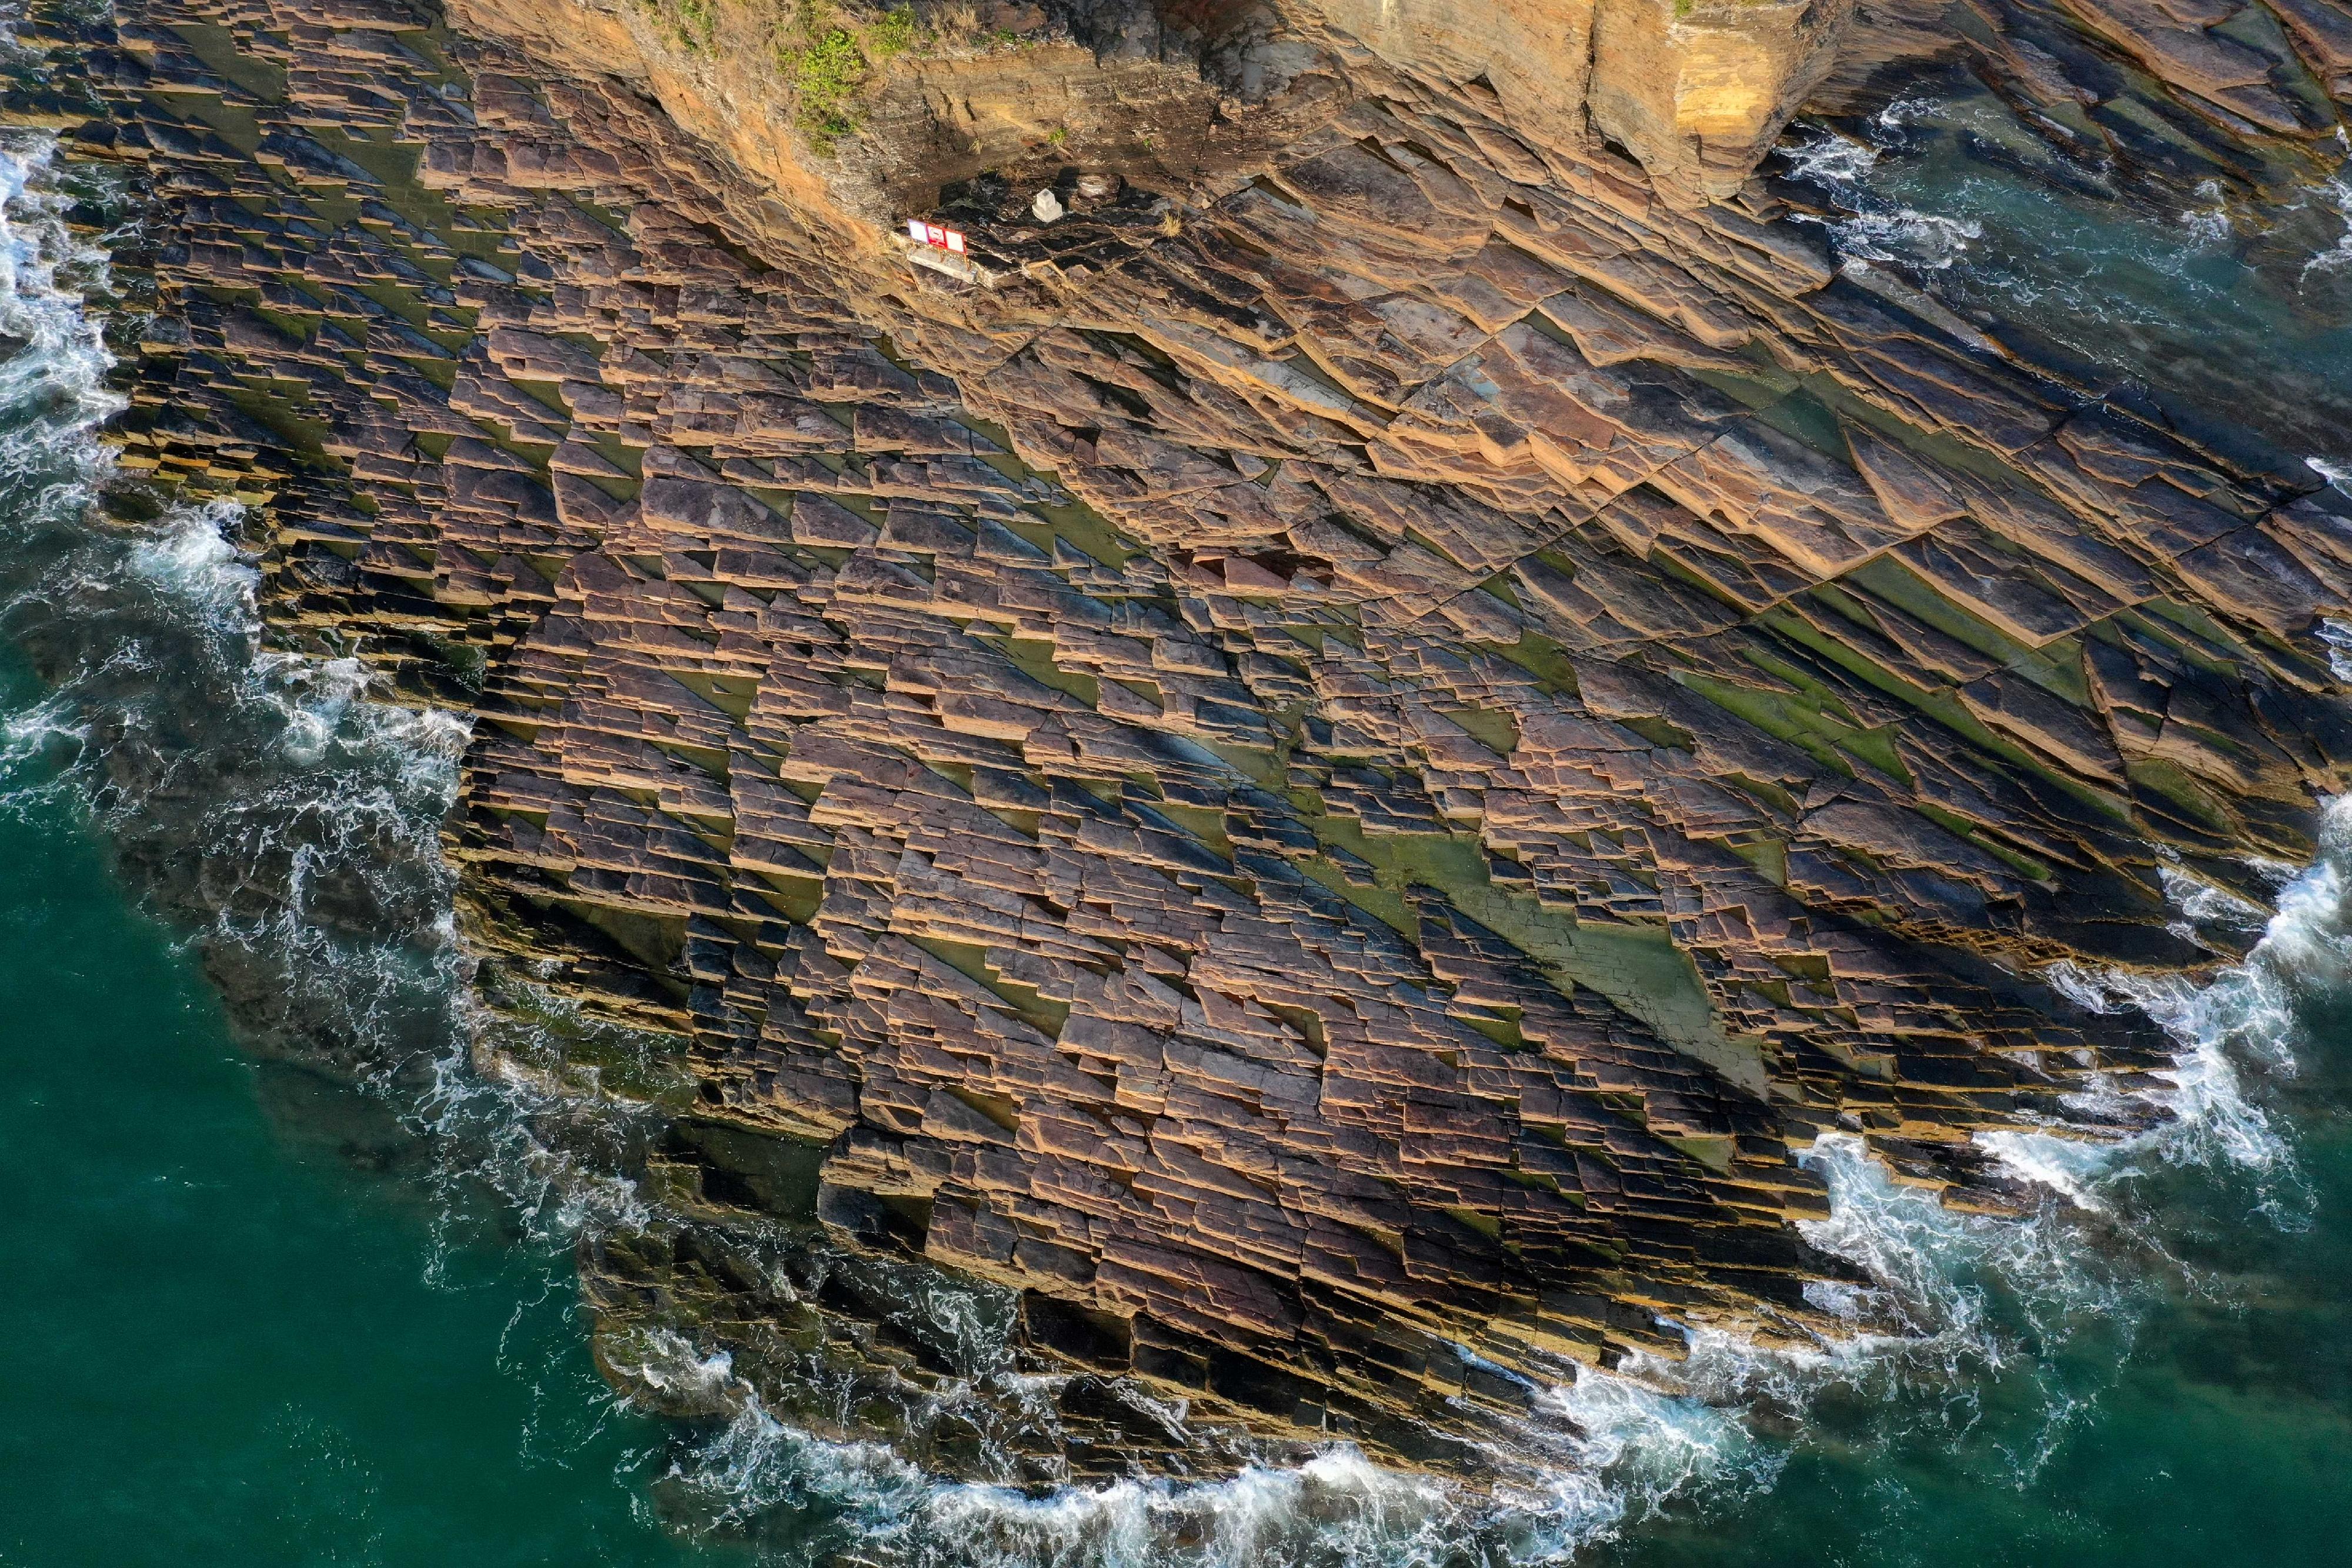 The Agriculture, Fisheries and Conservation Department announced the results of the Hong Kong Country Parks Photo cum Video Competition today (September 1). Photo shows "Fish Scale Pattern Rocks", the first runner-up of the landscape photography category, taken by Leung Gong-tsyn.